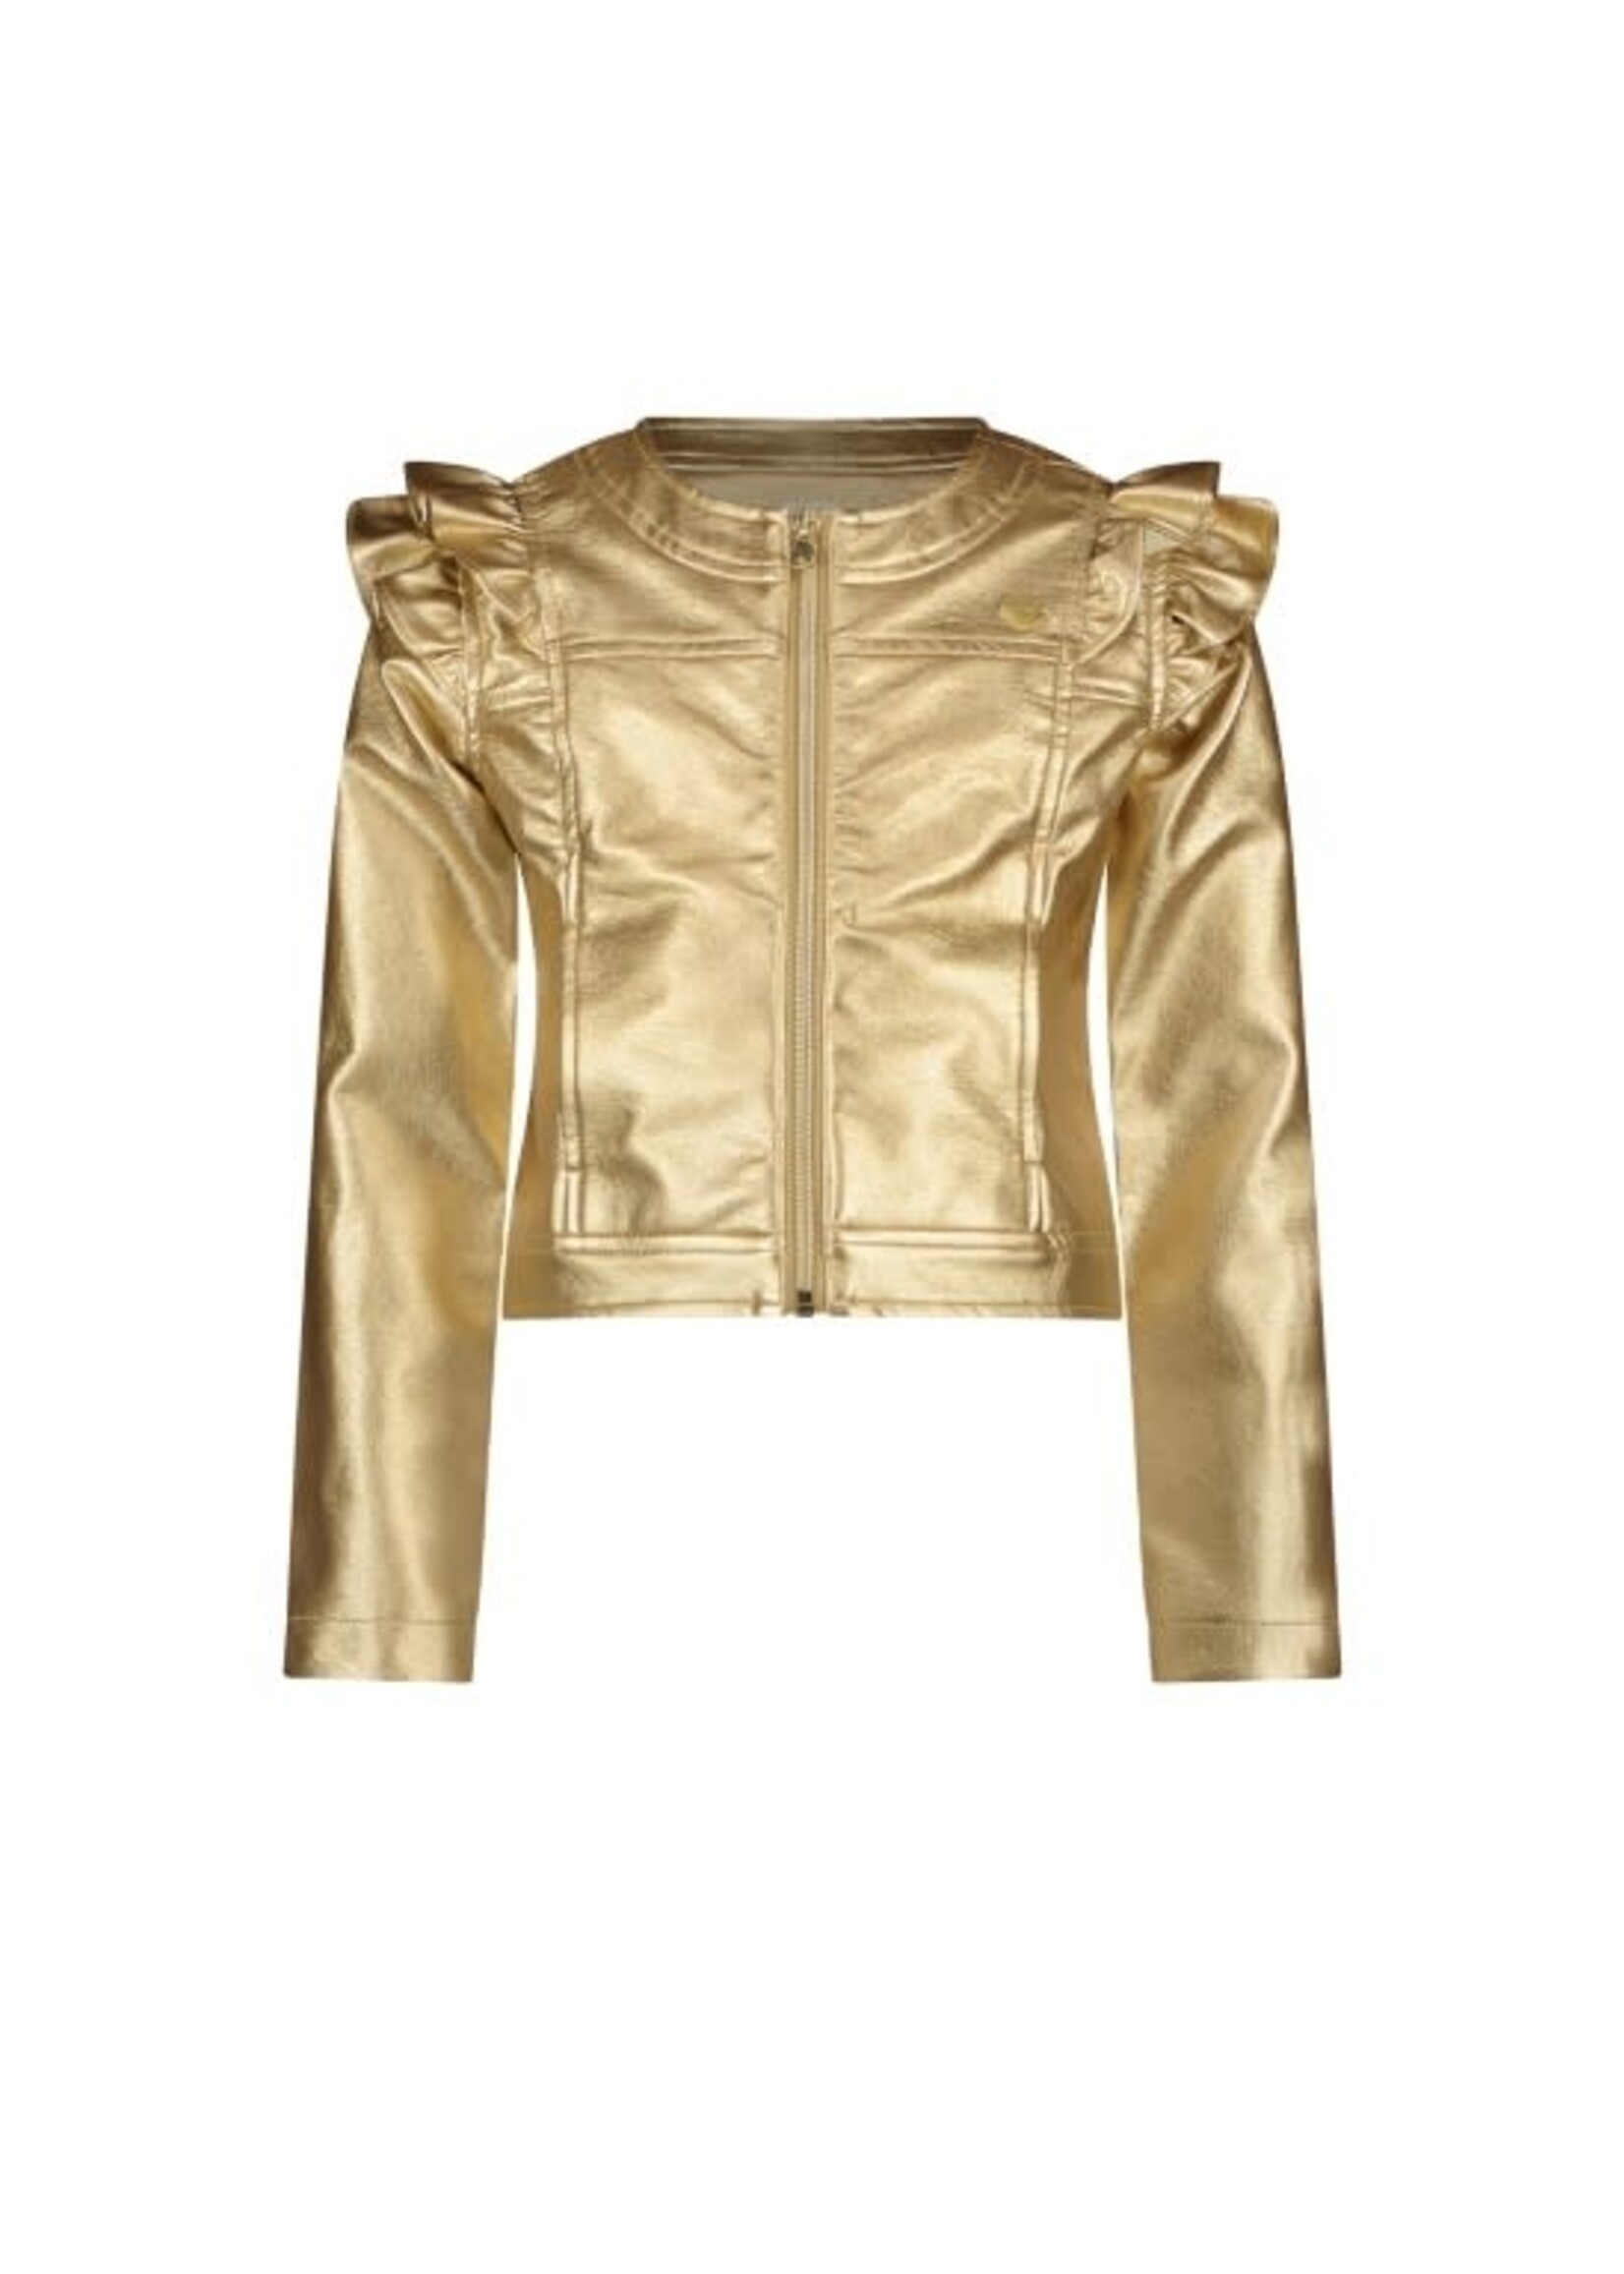 Le Chic Le Chic ARLYN gold fake leather jacket C312-5120 Champagne